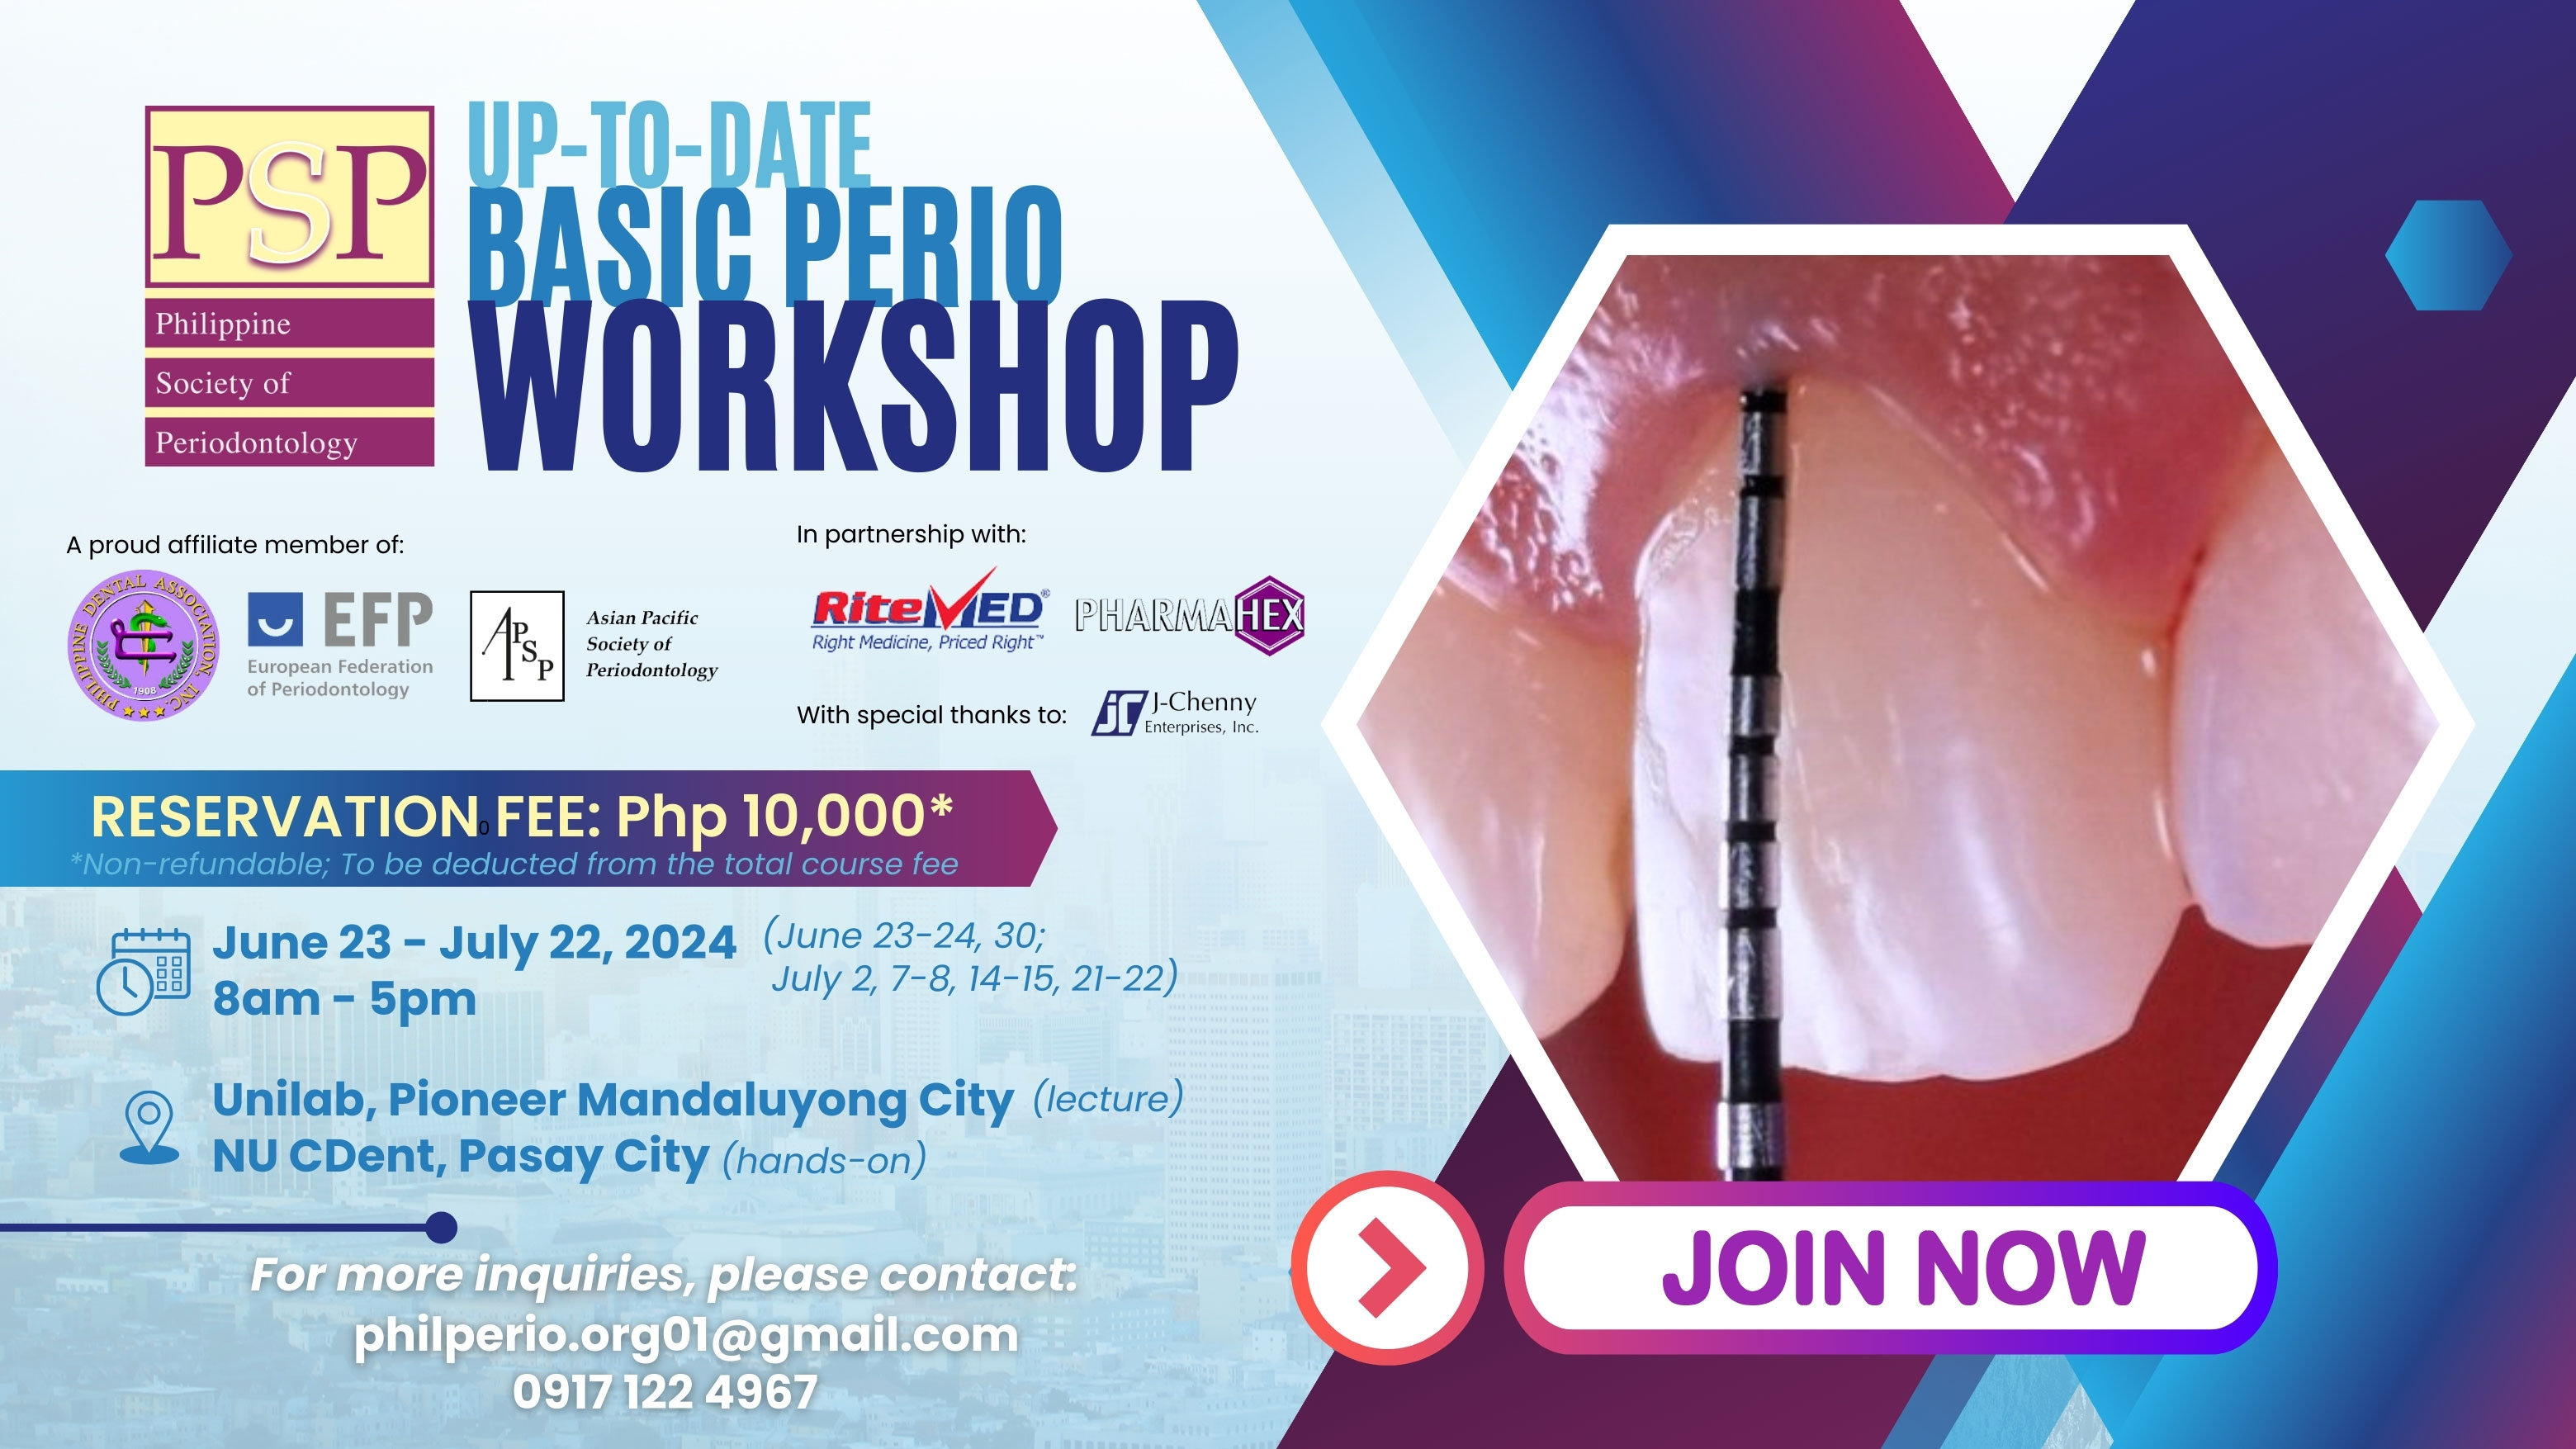 Up-to-Date Basic Perio Workshop